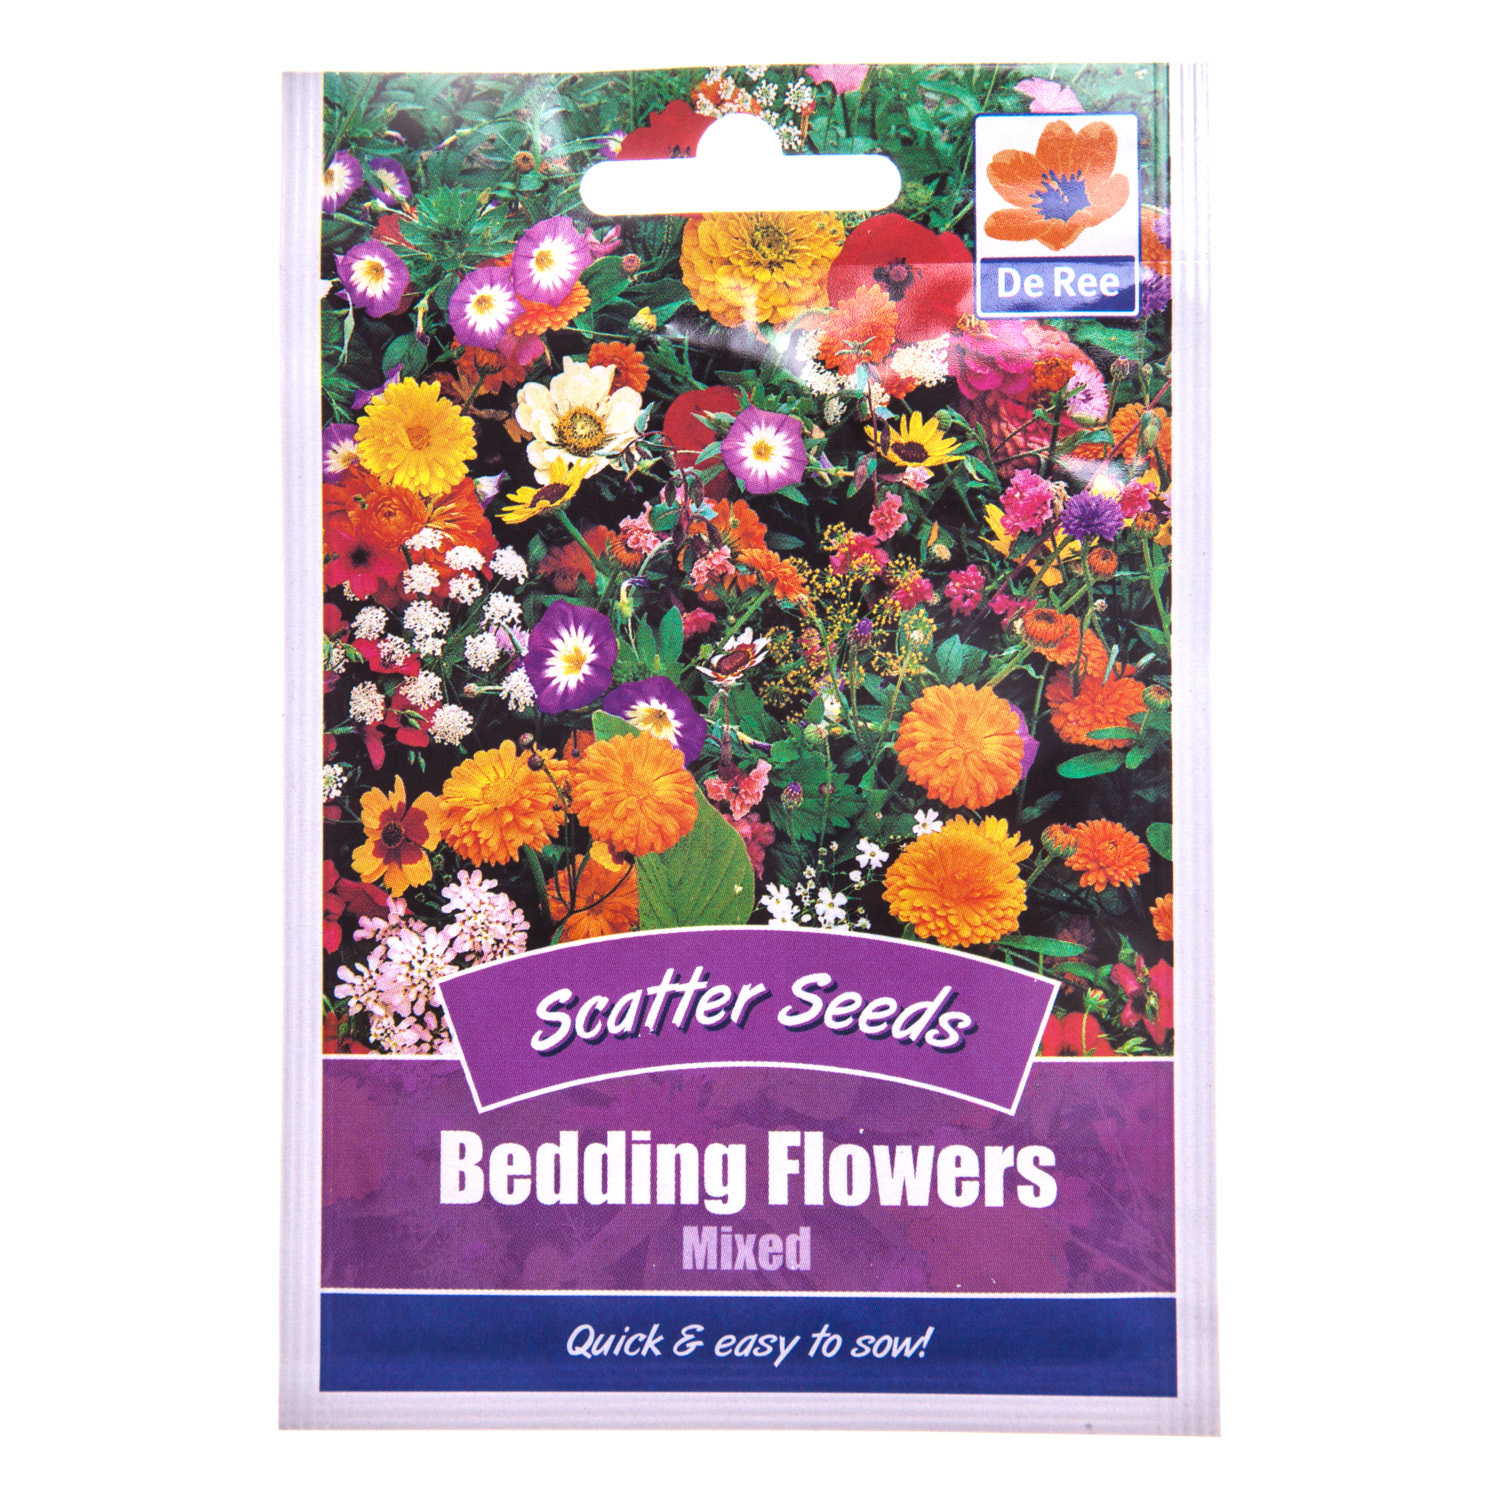 Mixed Bedding Flowers Scatter Seeds Image